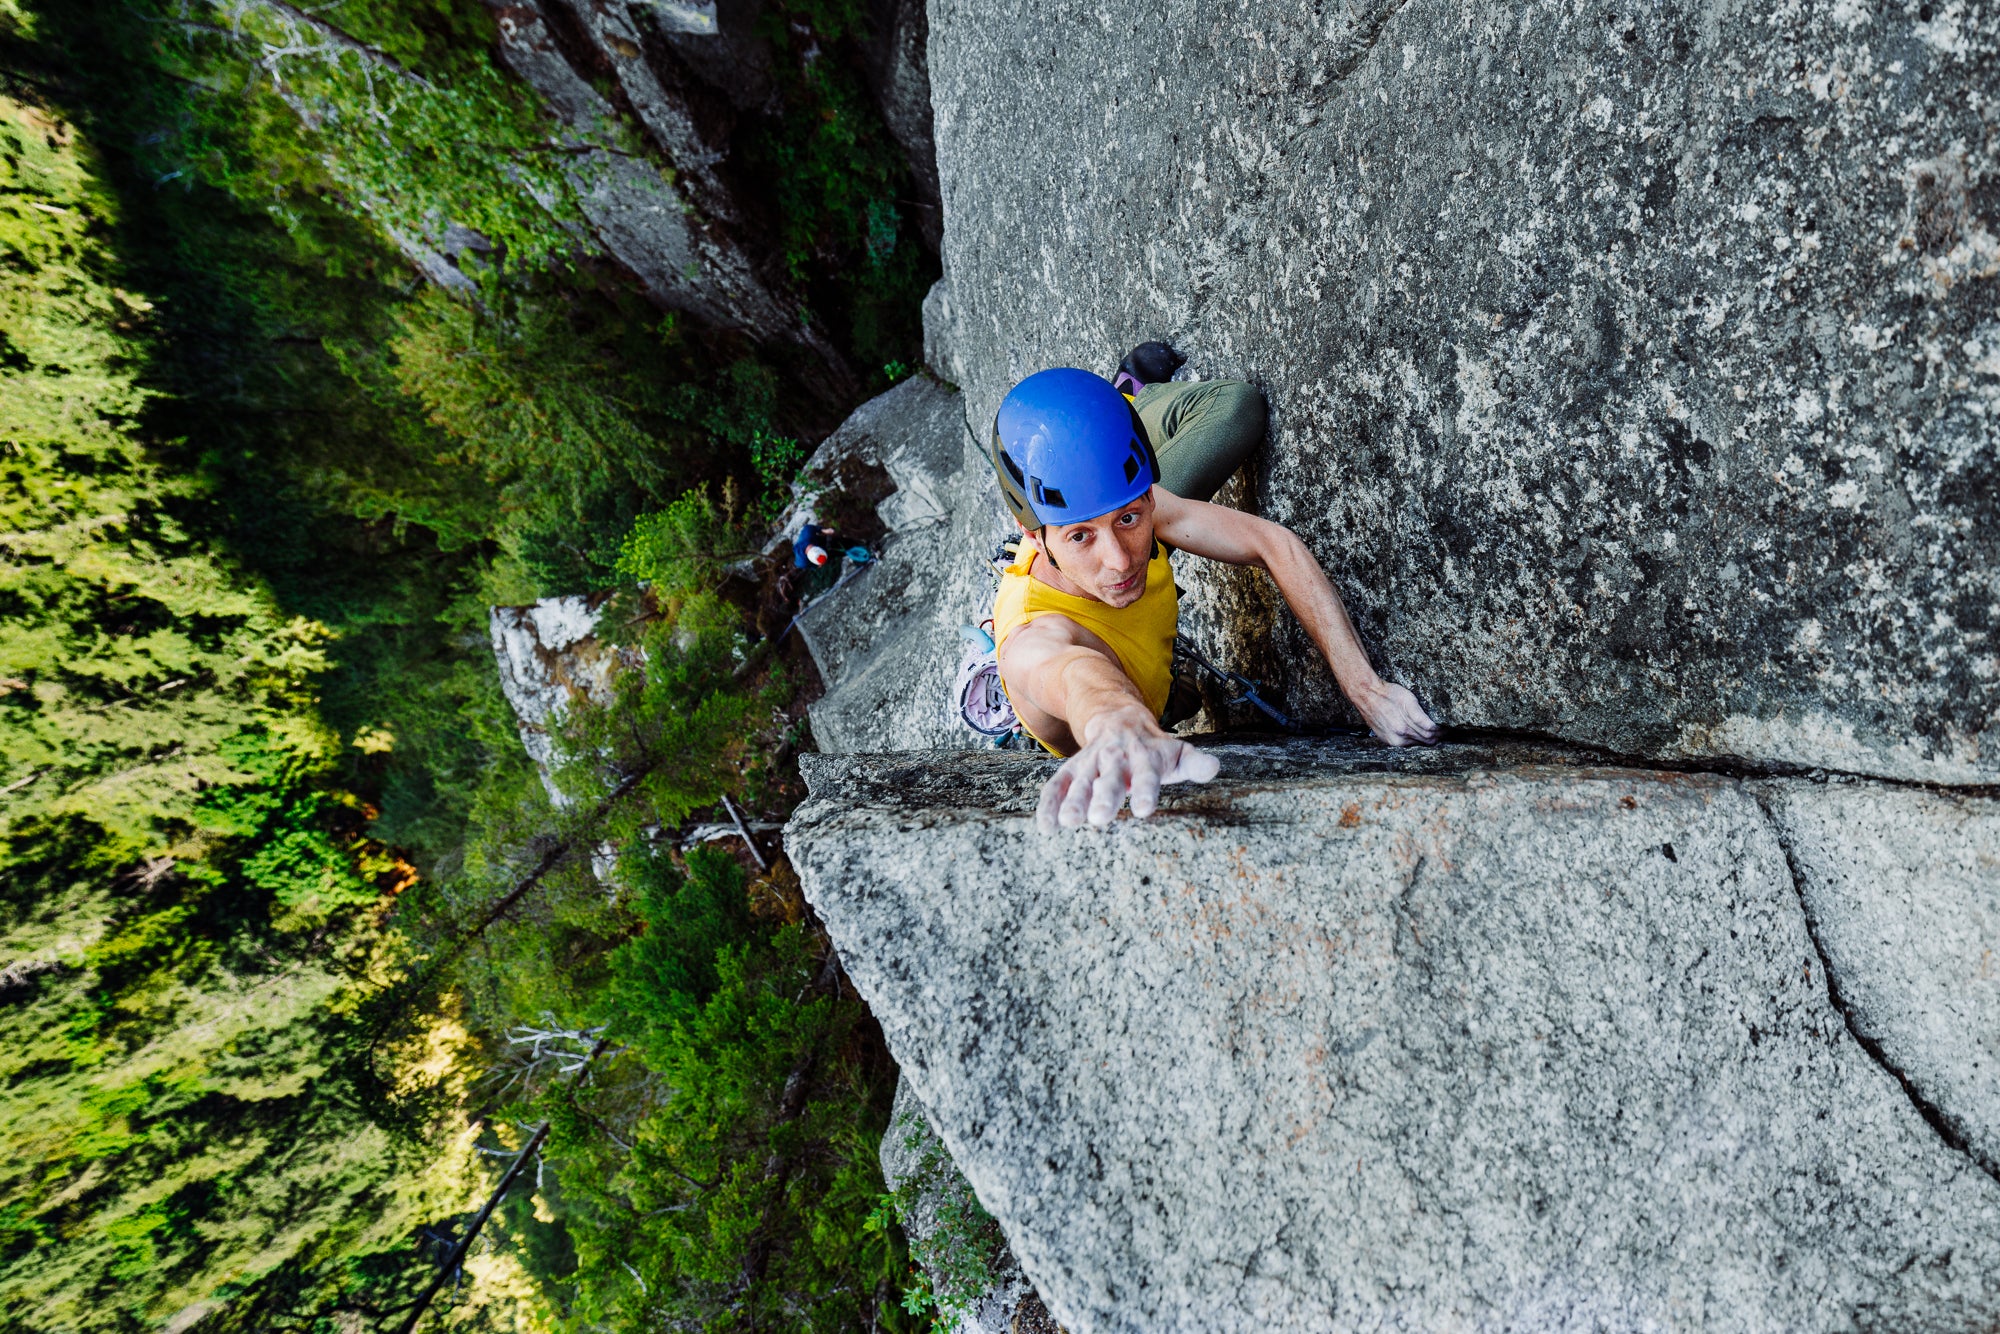 Luc Kennedy reaches for the final hold atop the crux sequence on P6.